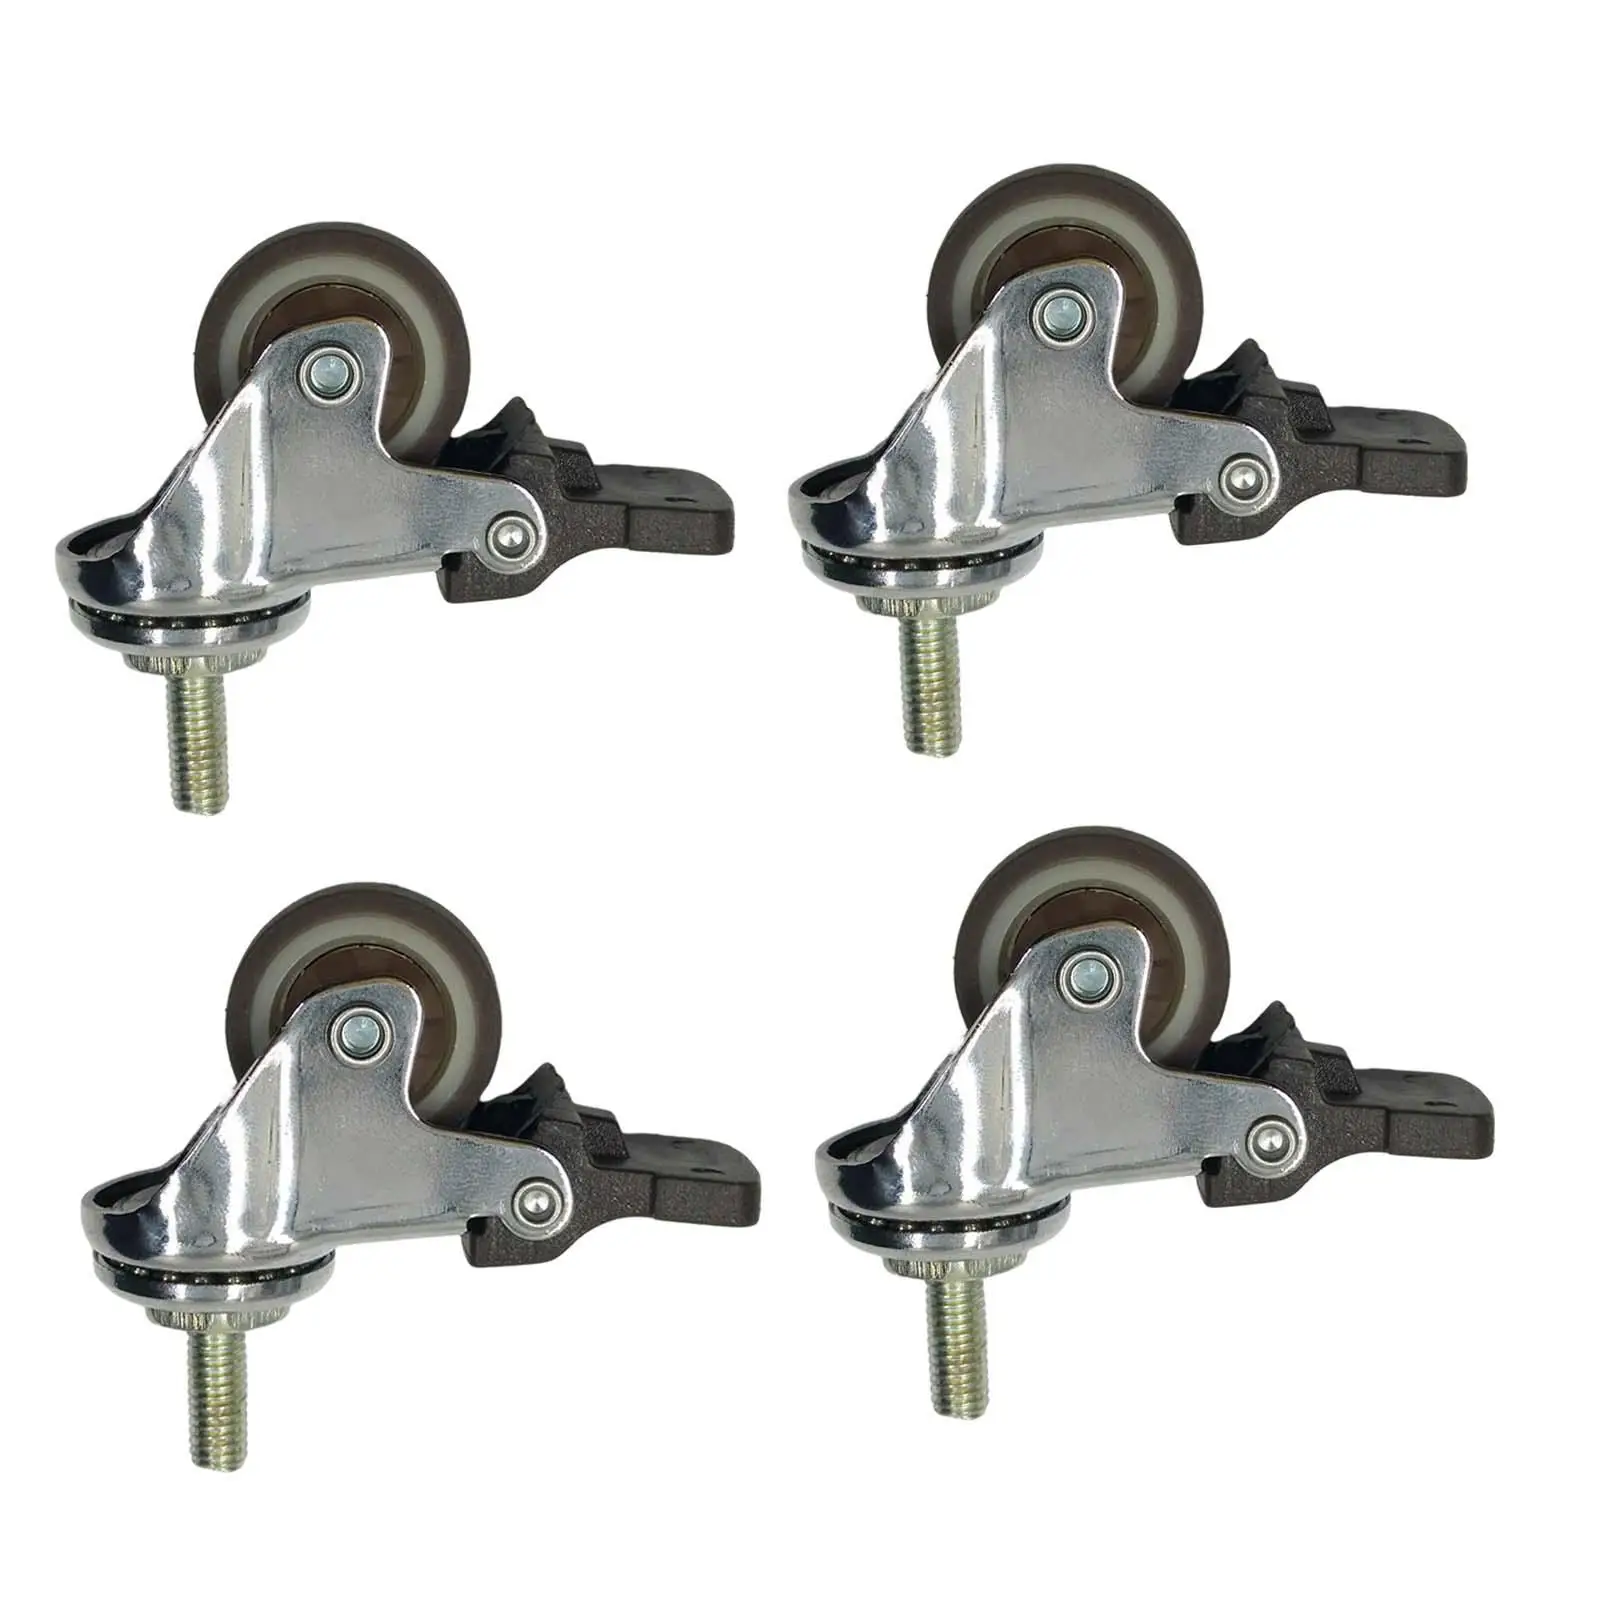 4 x Fixed Castor Wheels 1 inch Mini 360 Degree Rotation Drawer Wheel for Furniture Floor Protecting